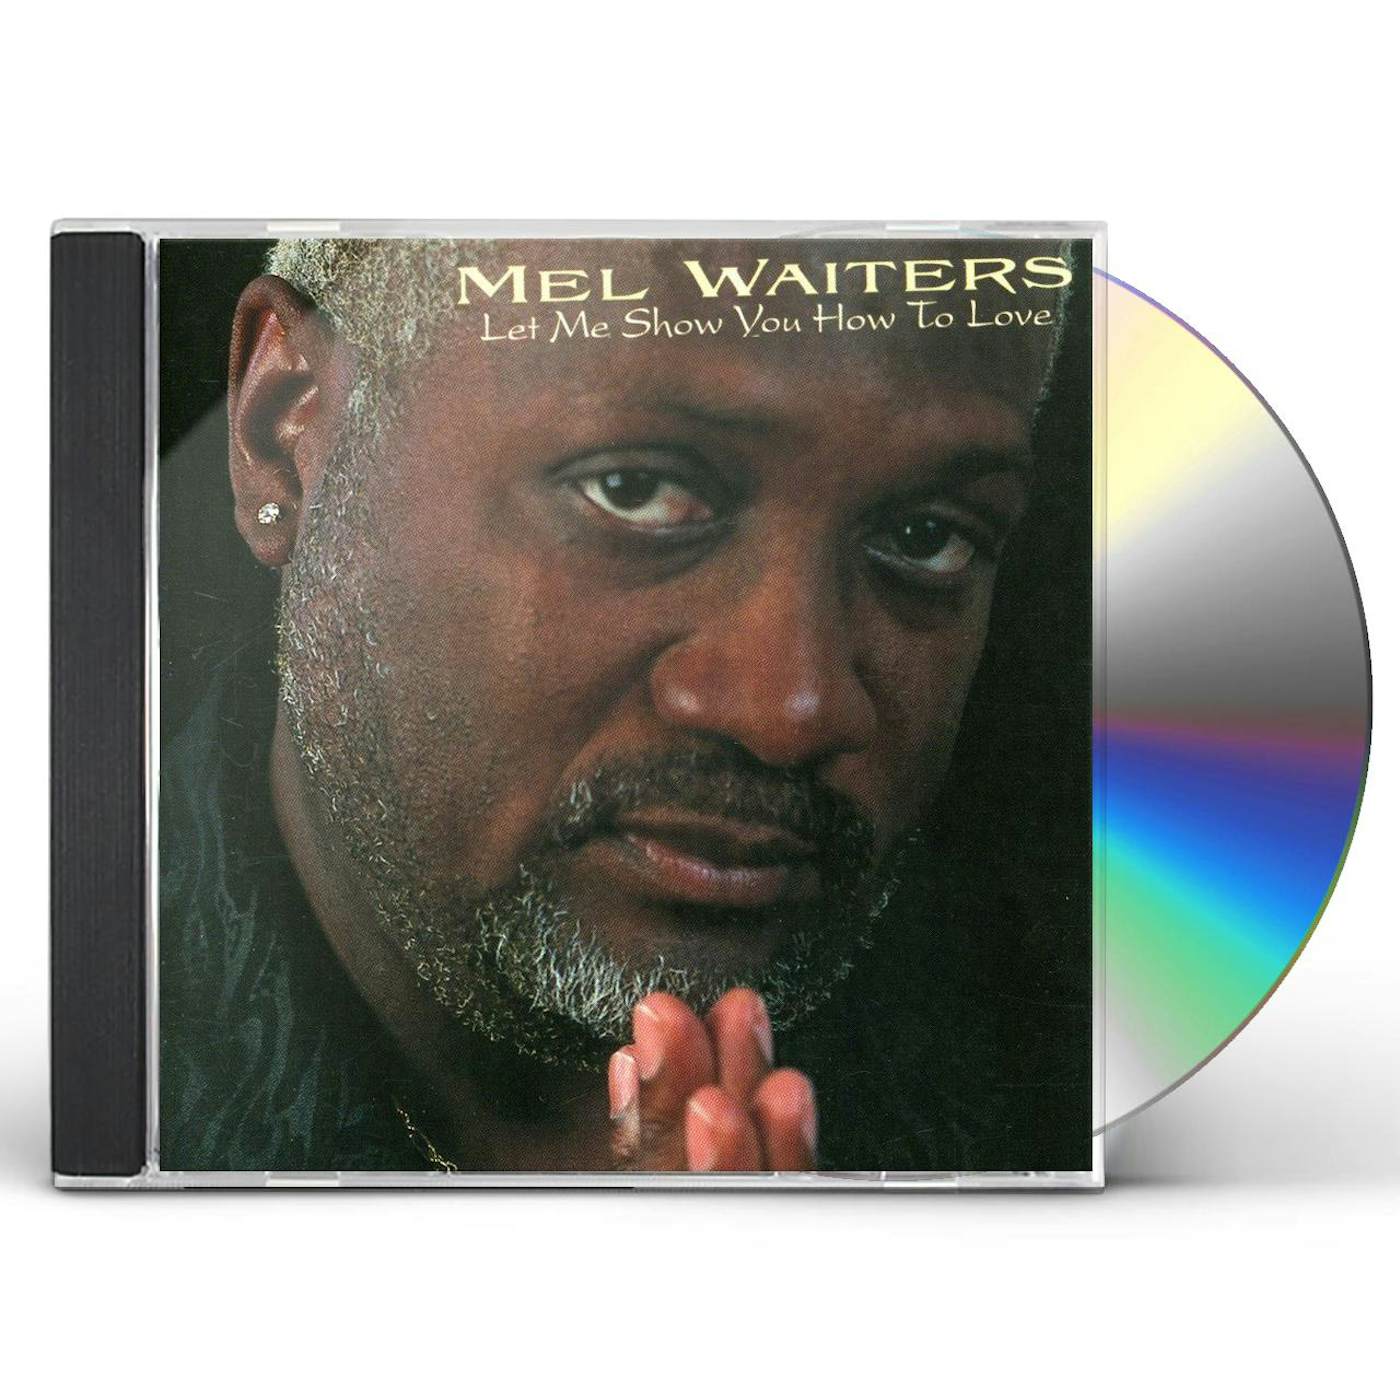 Mel Waiters LET ME SHOW YOU HOW TO LOVE CD